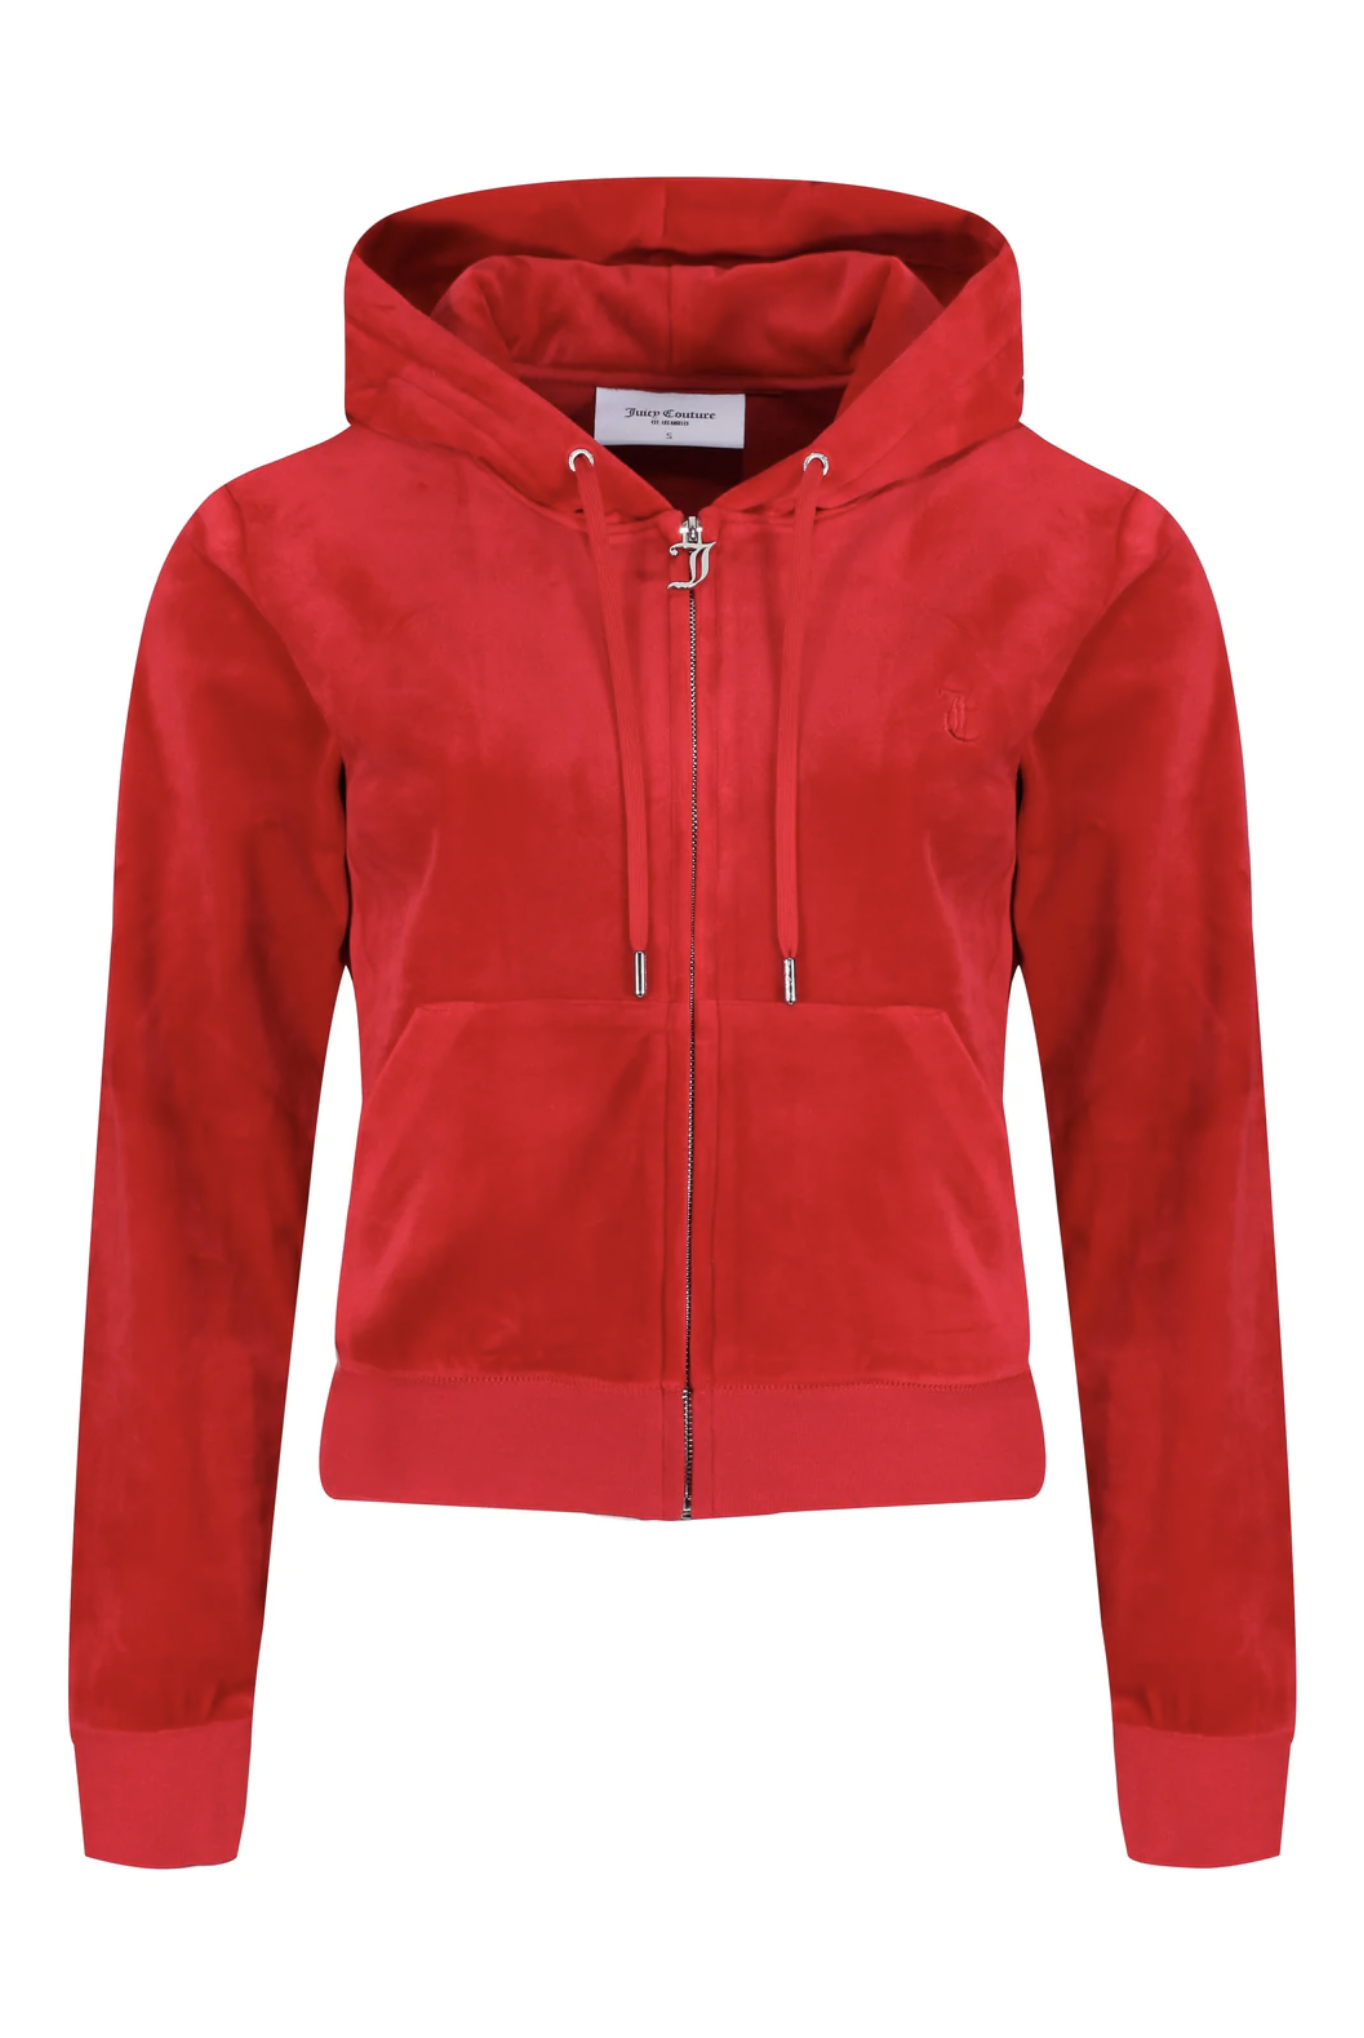 Juicy Couture Robertson Classic Velour Hoodie - Astor Red